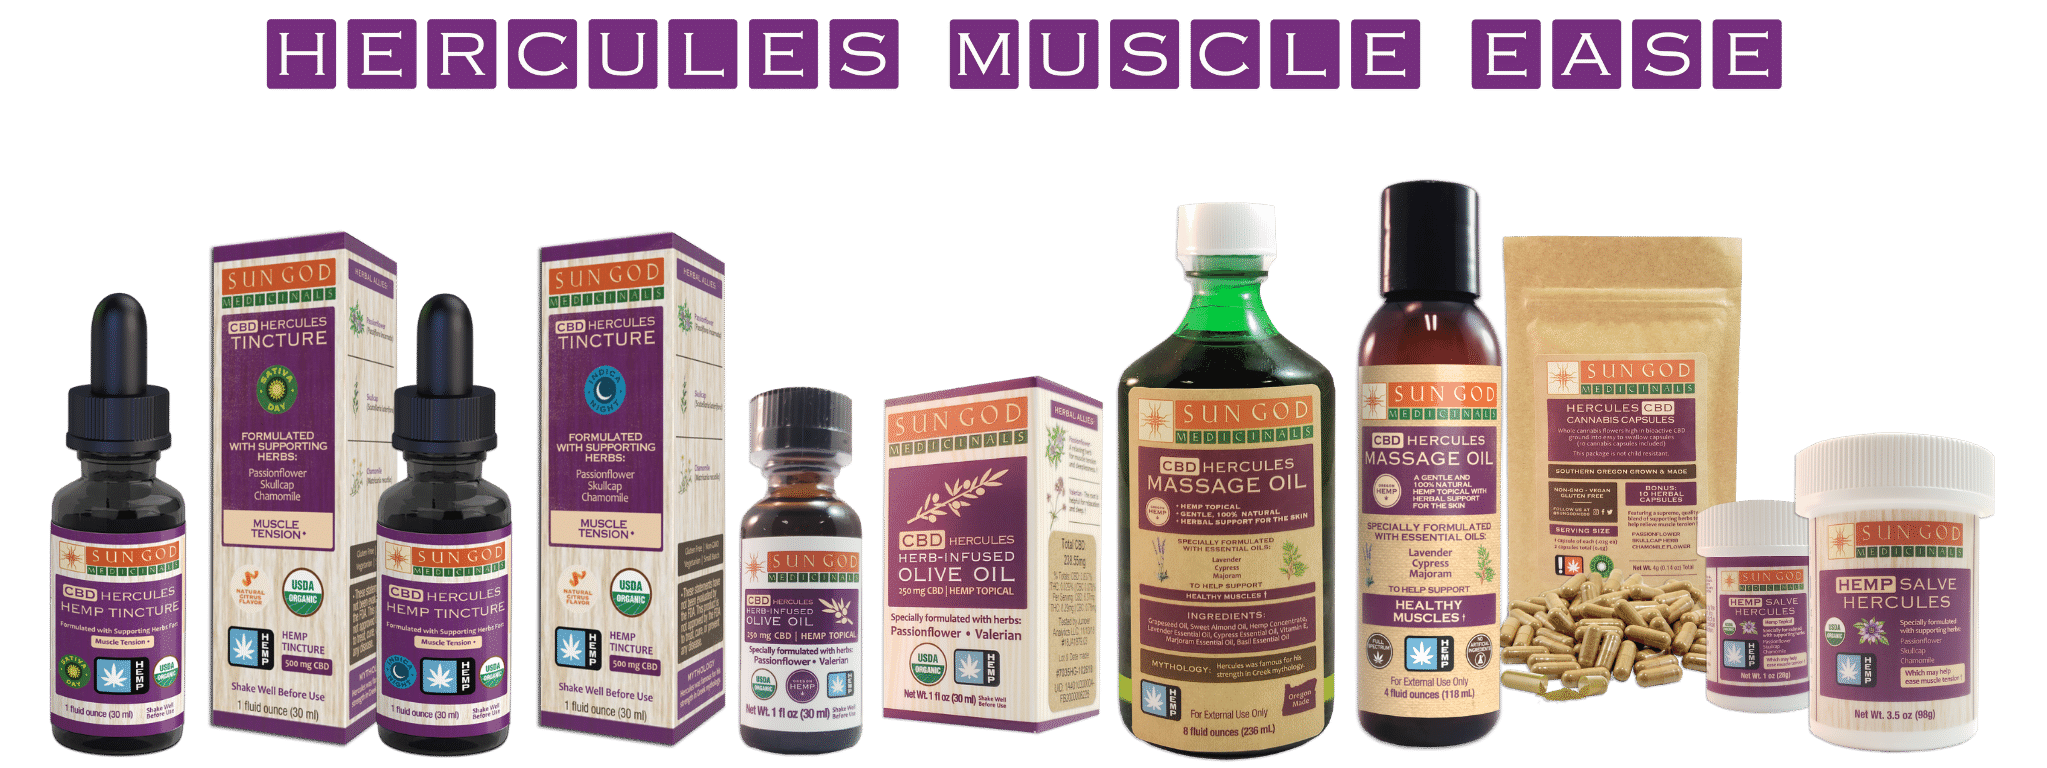 Herbal Products For Muscle Ease - by Sun God Medicinals